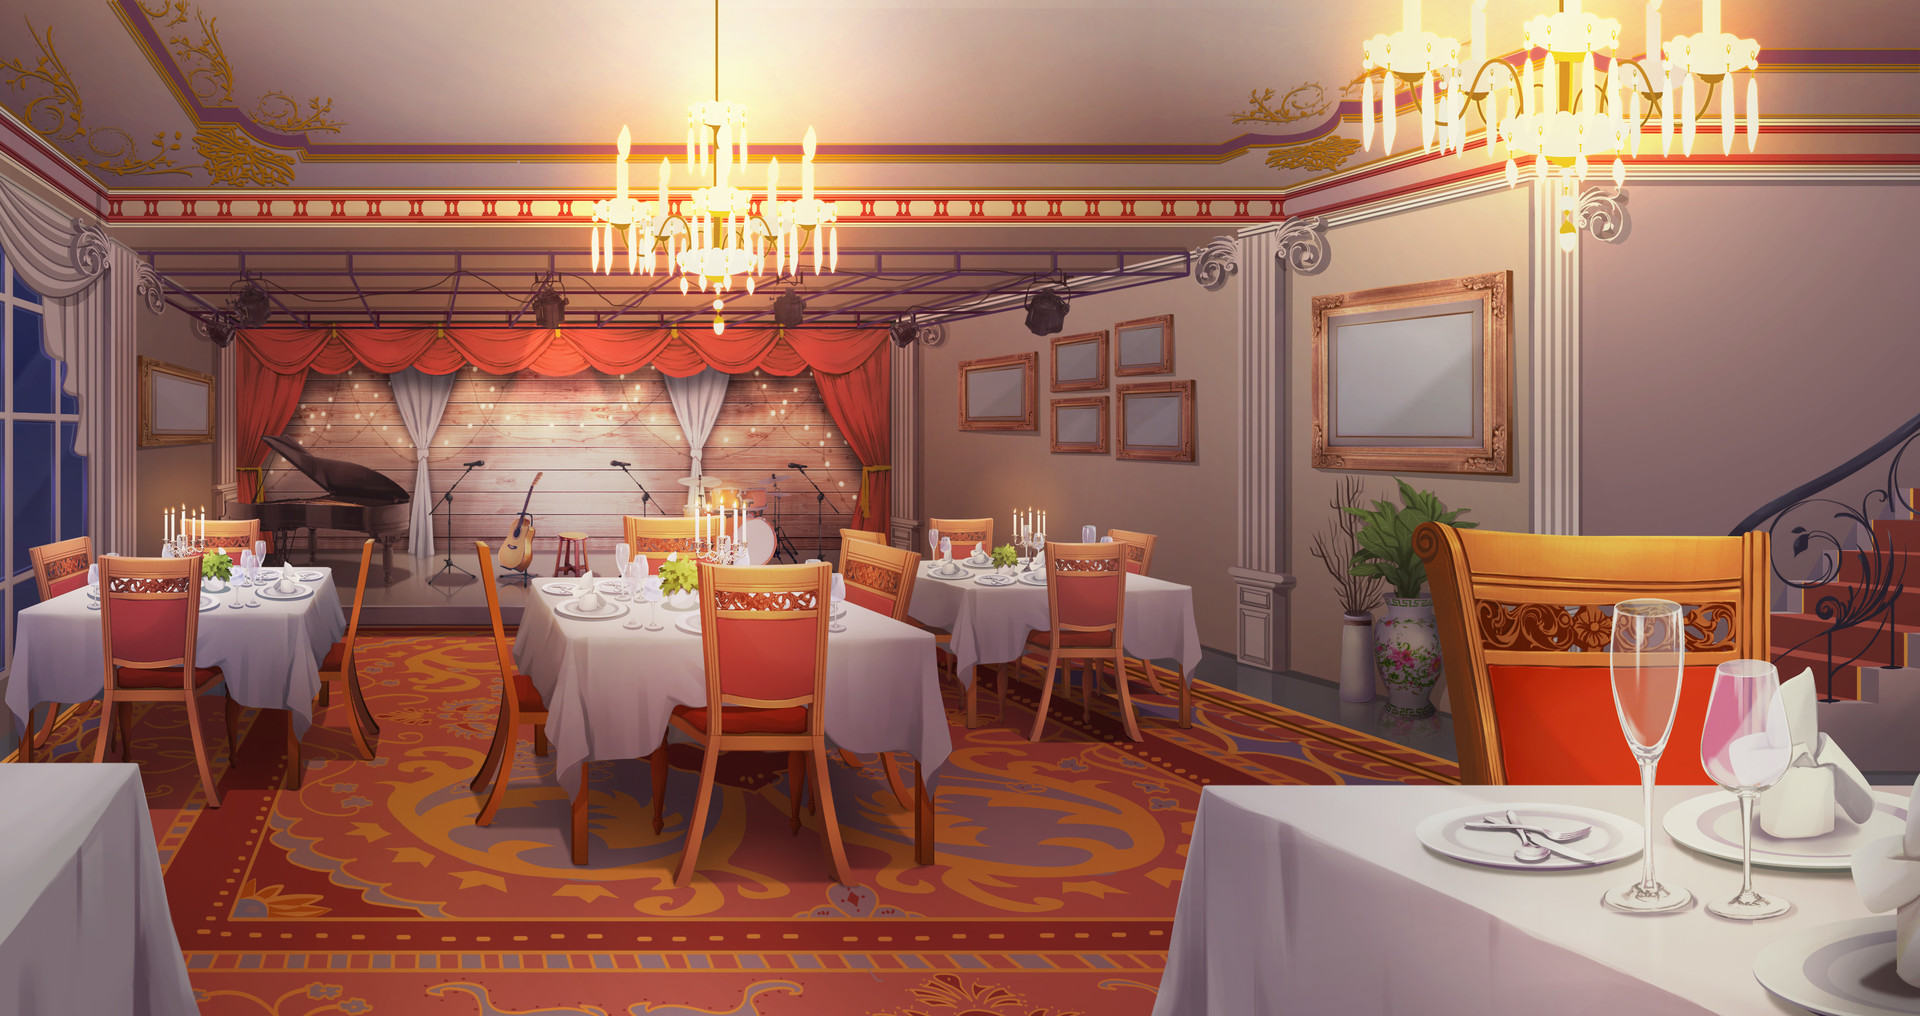 Restaurant background needed for story  Art Resources  Episode Forums